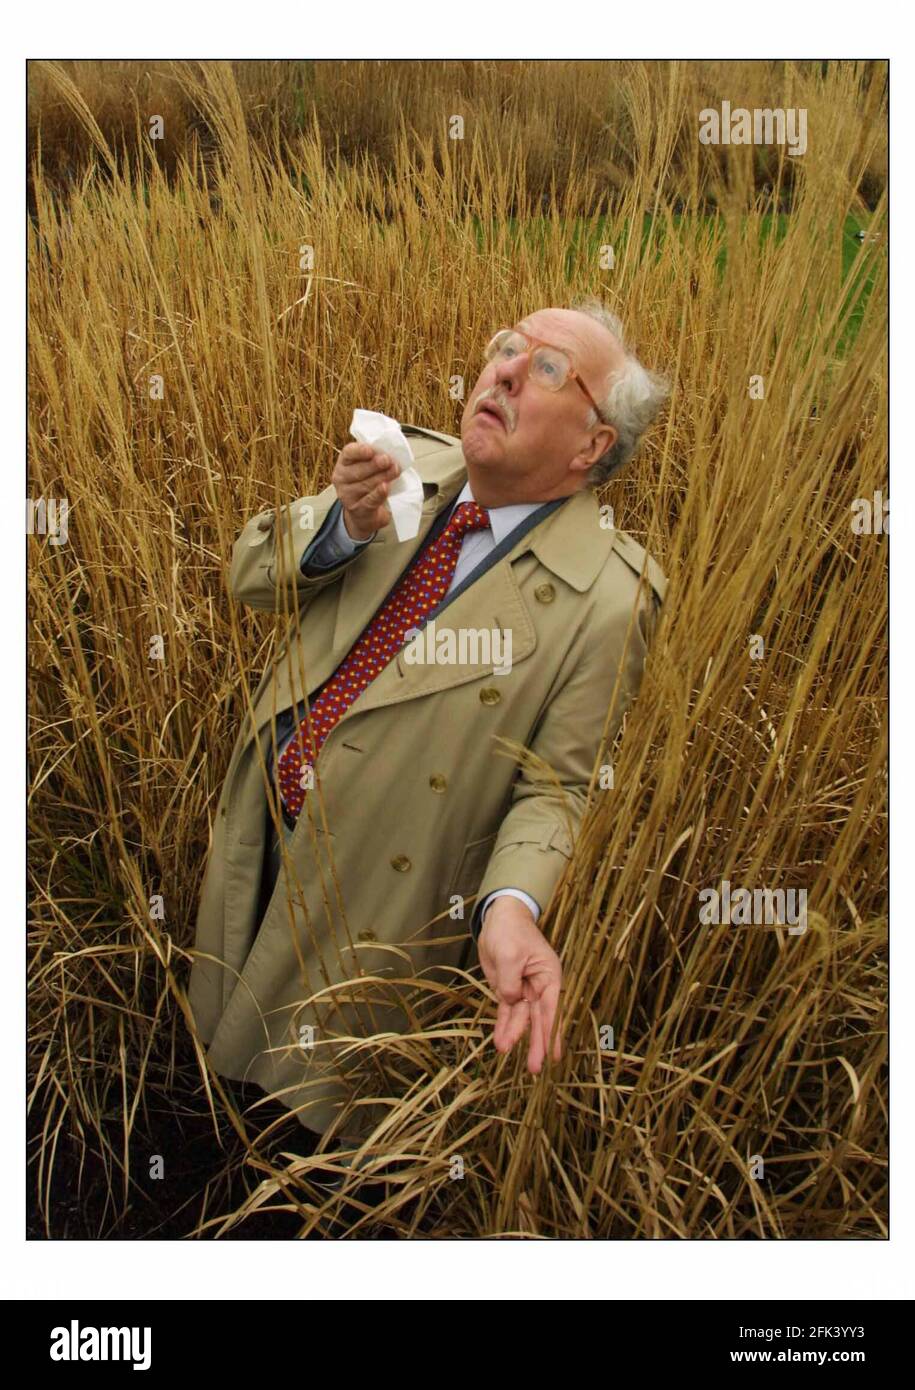 The Weatherman Michael Fish, a hayfeaver sufferer, is helping The Woodland Trust monitor the emergence of grasspollen at Kew Gardens. Climate change means grass is releasing pollen earlier which is bad for hayfeaver sufferers.pic David Sandison 12/2/2003 Stock Photo